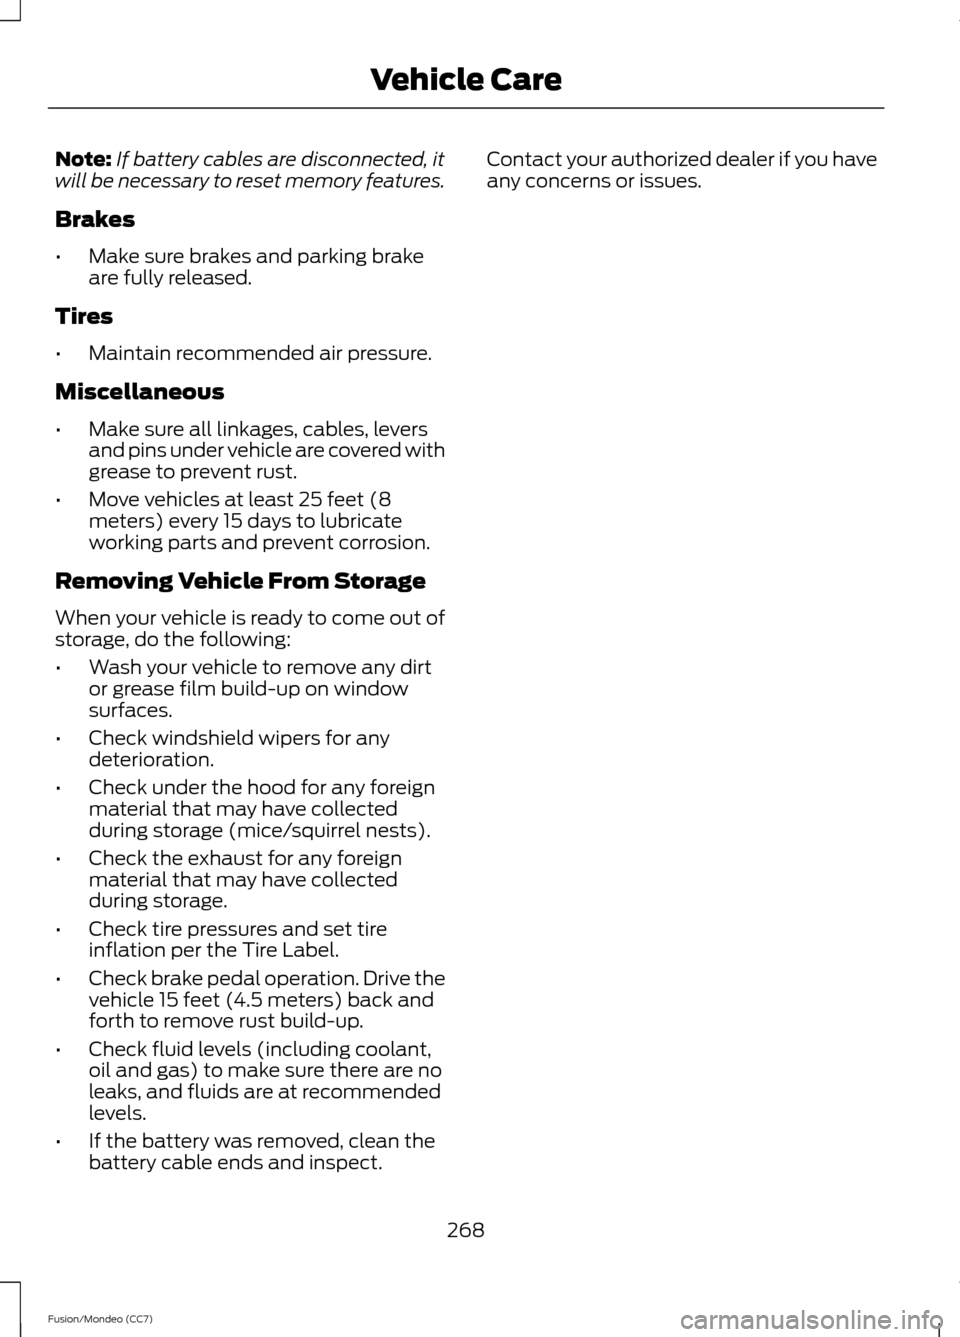 FORD FUSION (AMERICAS) 2013 2.G User Guide Note:
If battery cables are disconnected, it
will be necessary to reset memory features.
Brakes
• Make sure brakes and parking brake
are fully released.
Tires
• Maintain recommended air pressure.
